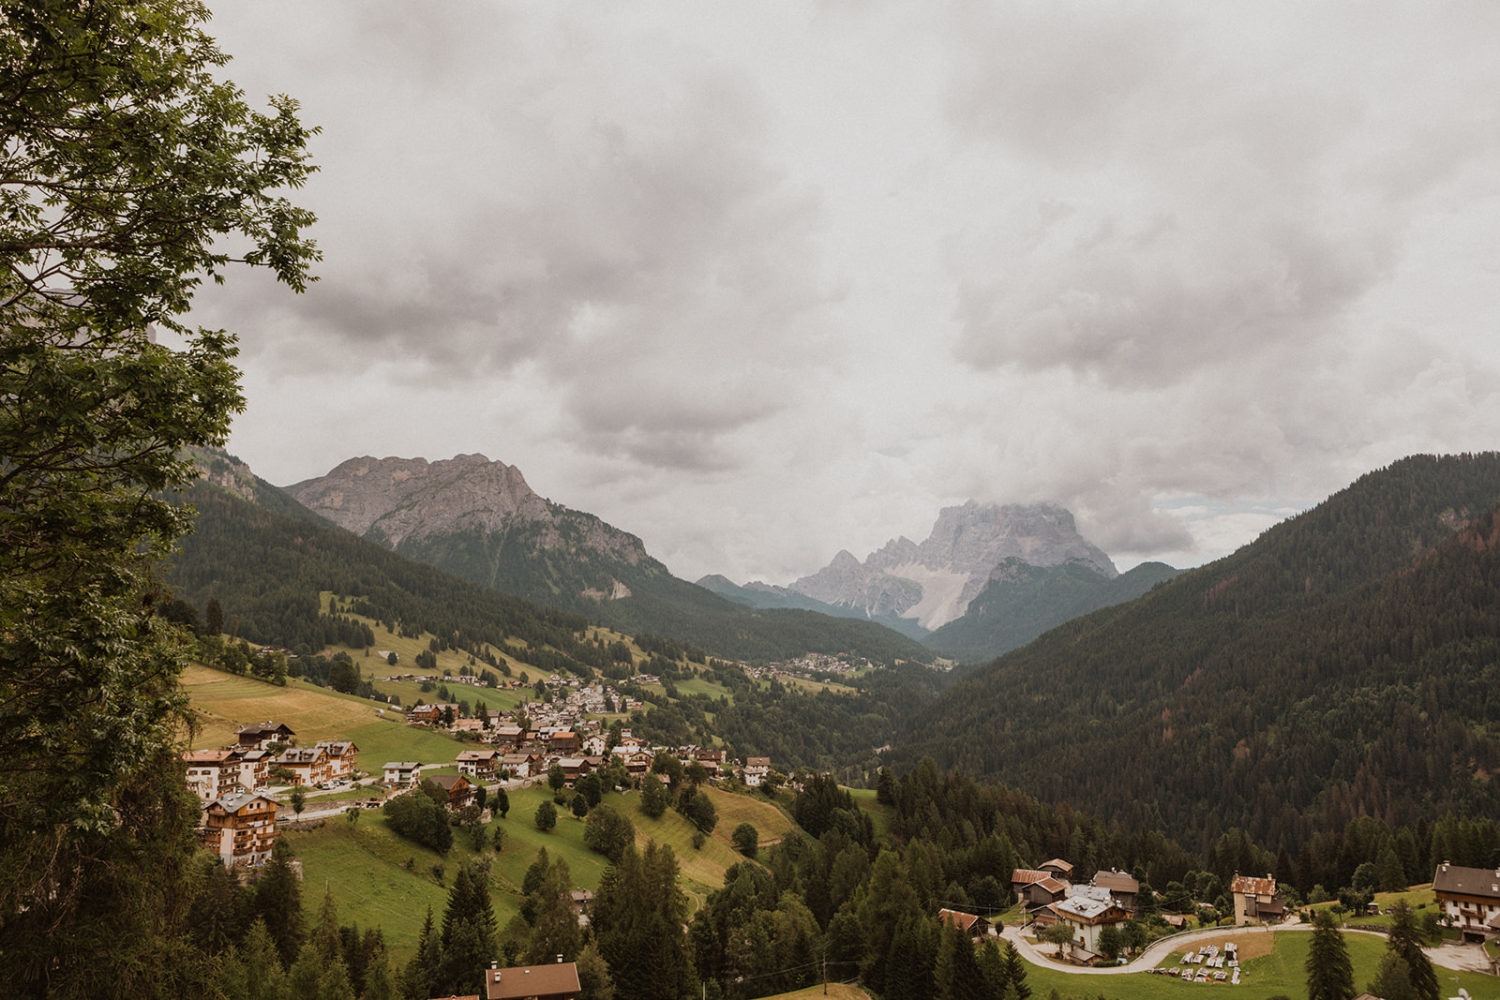 Village underneath cloud-covered dolomites in Italy captured by destination wedding photographer 